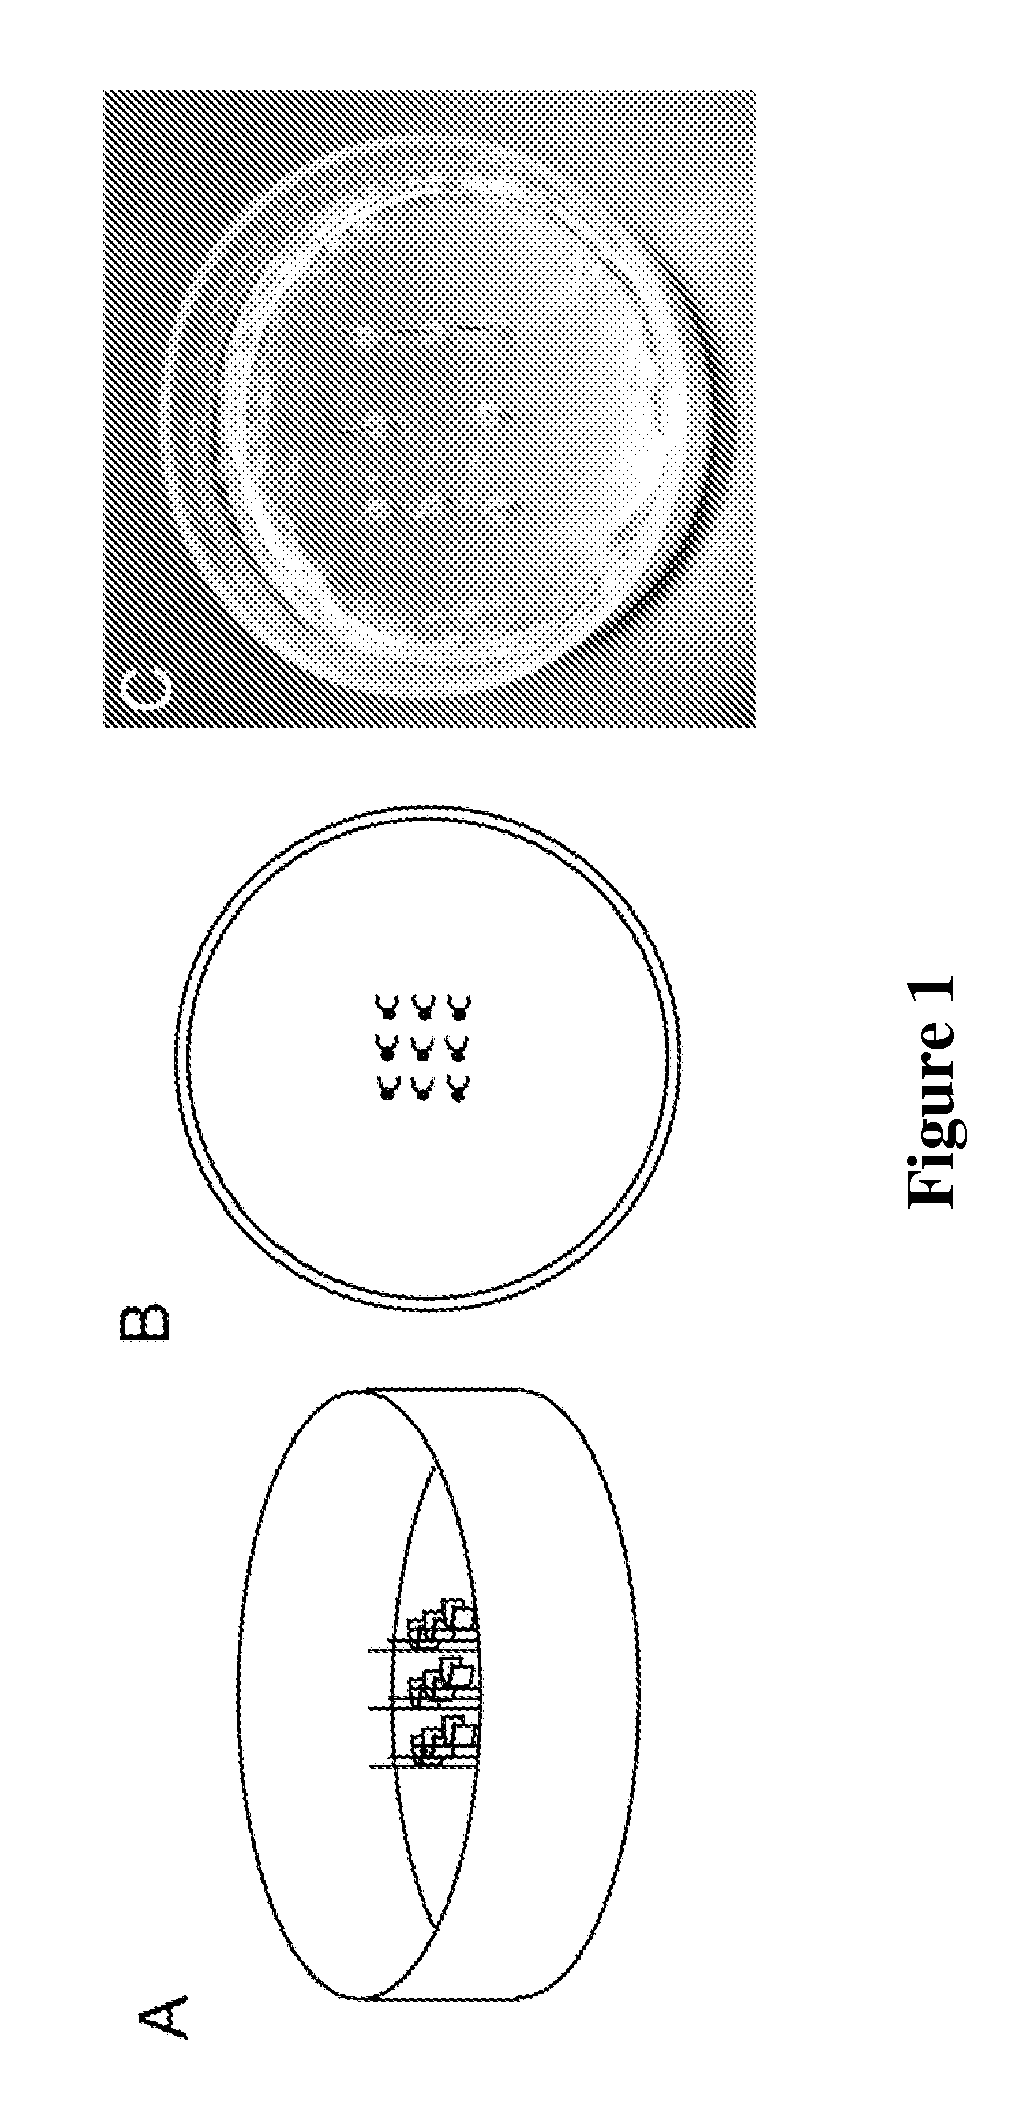 Devices comprising muscle thin films and uses thereof in high throughput assays for determining contractile function